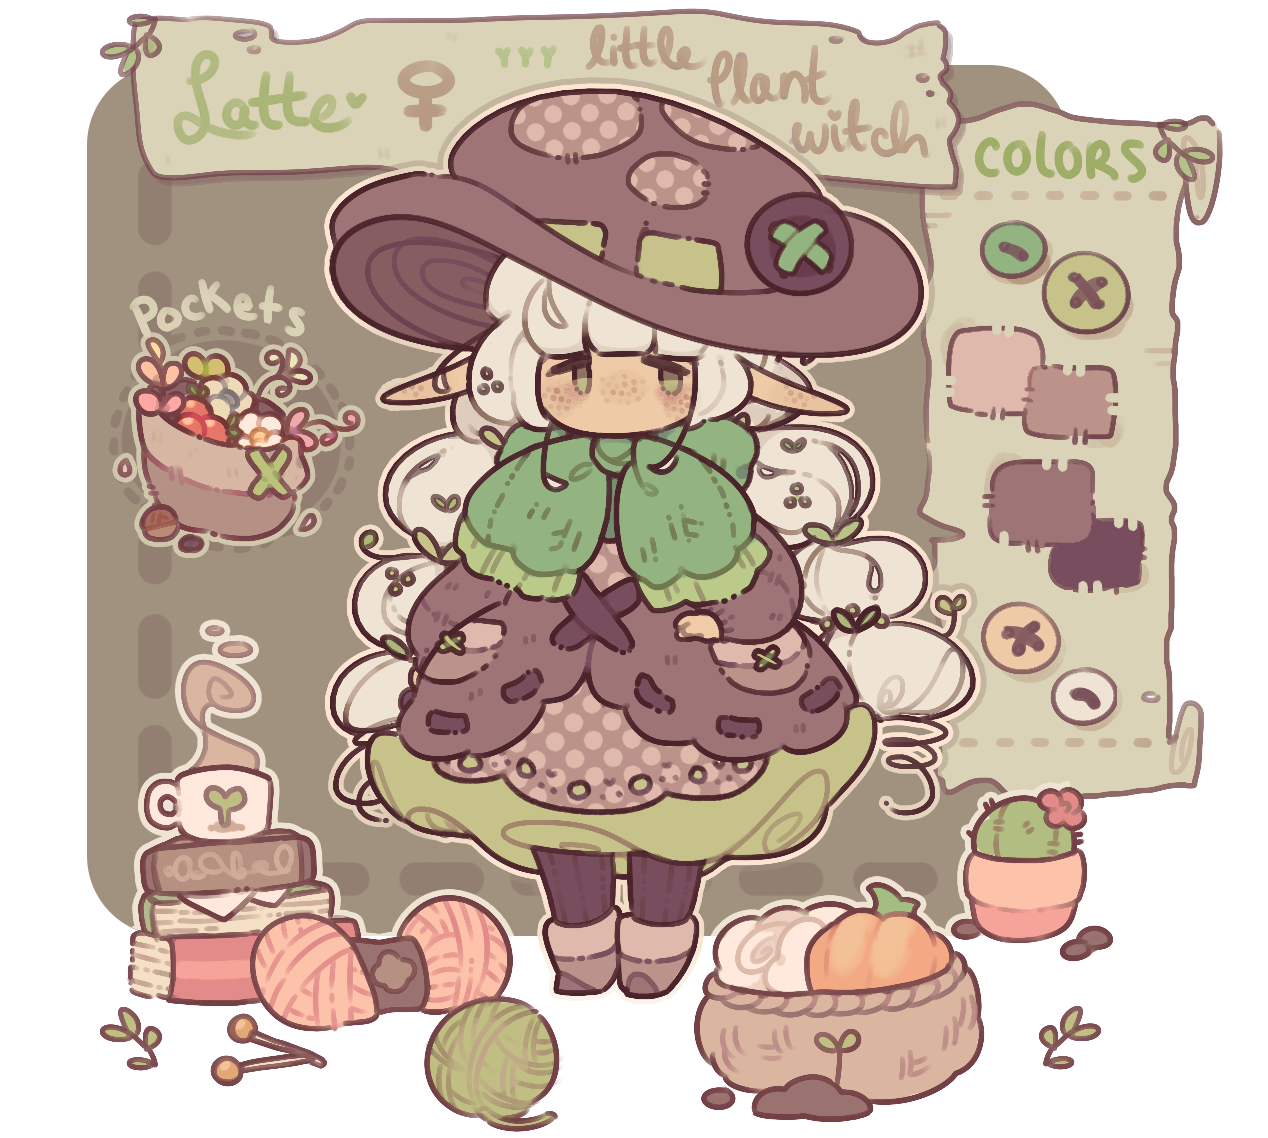 cottage clipart witch